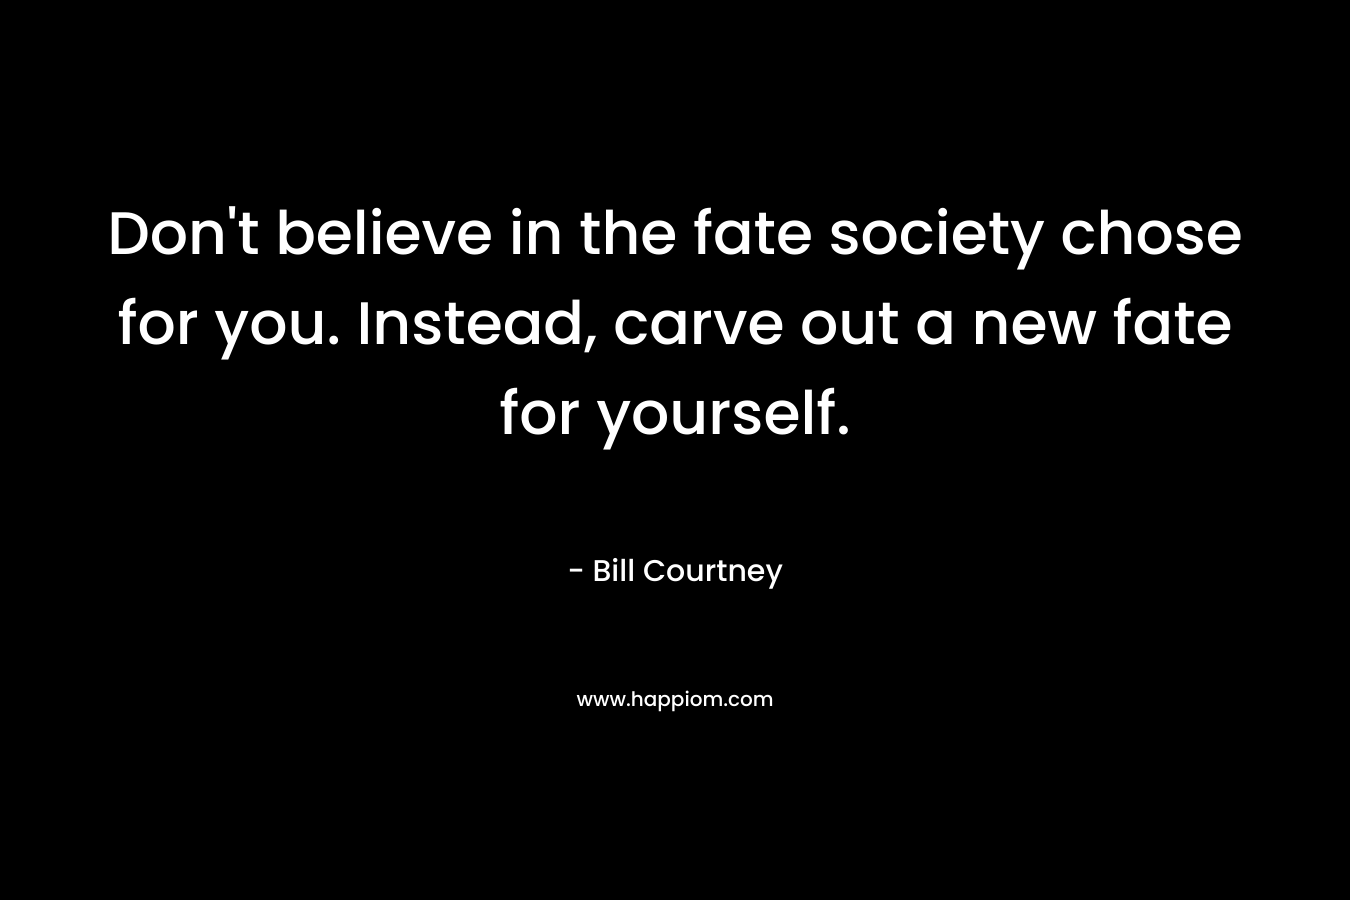 Don't believe in the fate society chose for you. Instead, carve out a new fate for yourself.